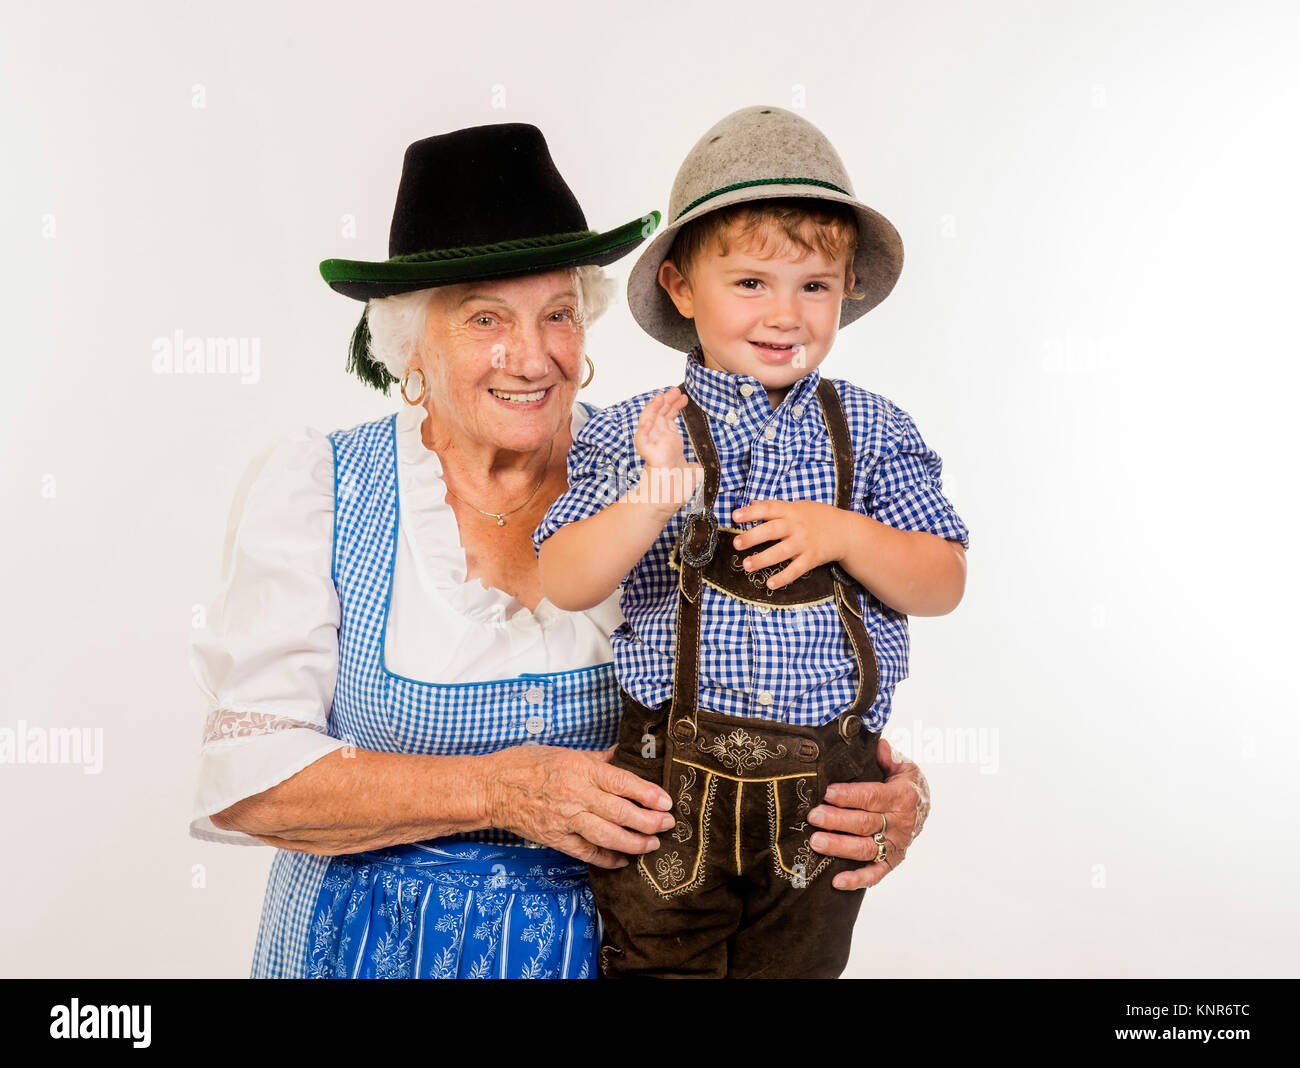 Seniorin und Bub in Tracht - older woman and little boy in traditional costume Stock Photo